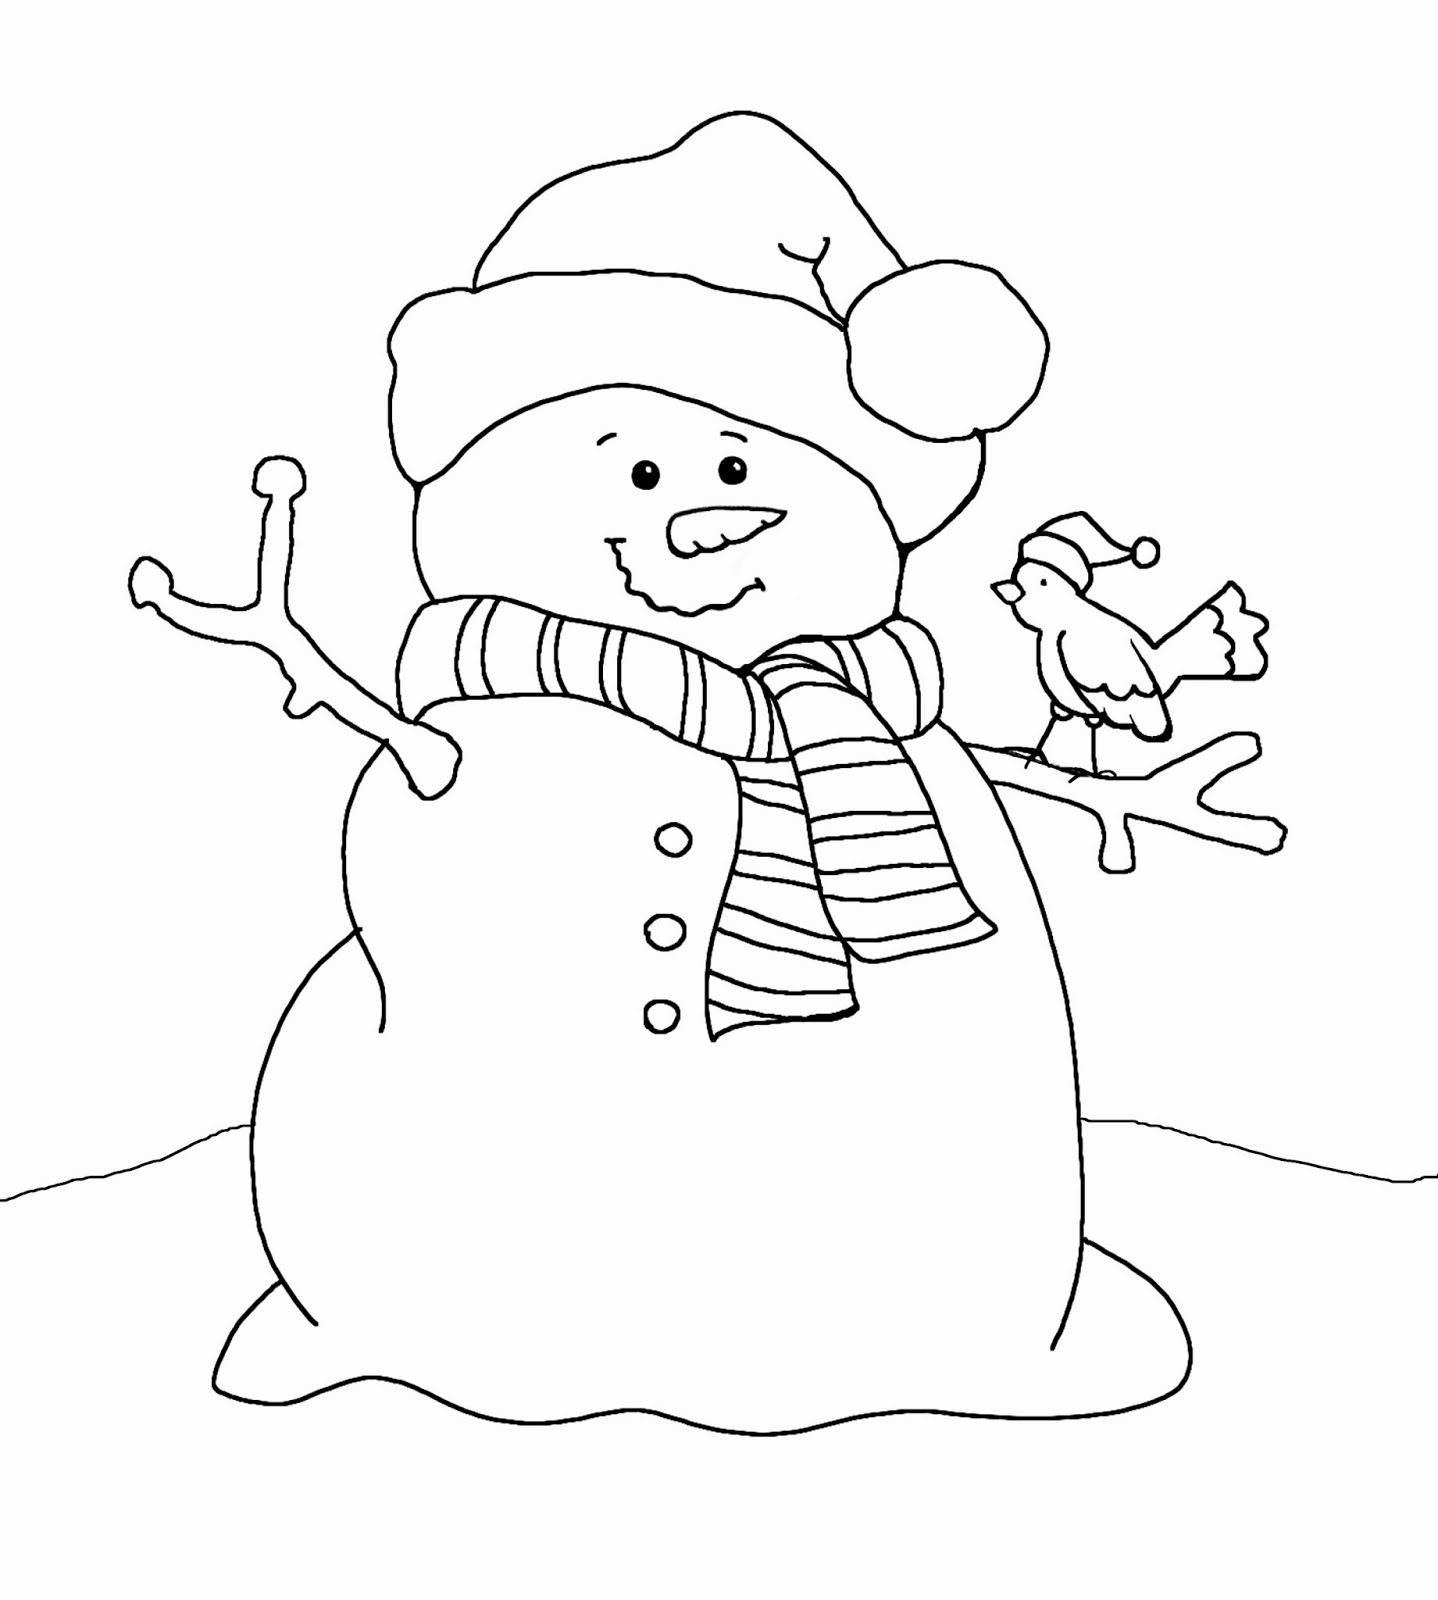 Cute Snowman Coloring Pages at GetColorings com Free printable